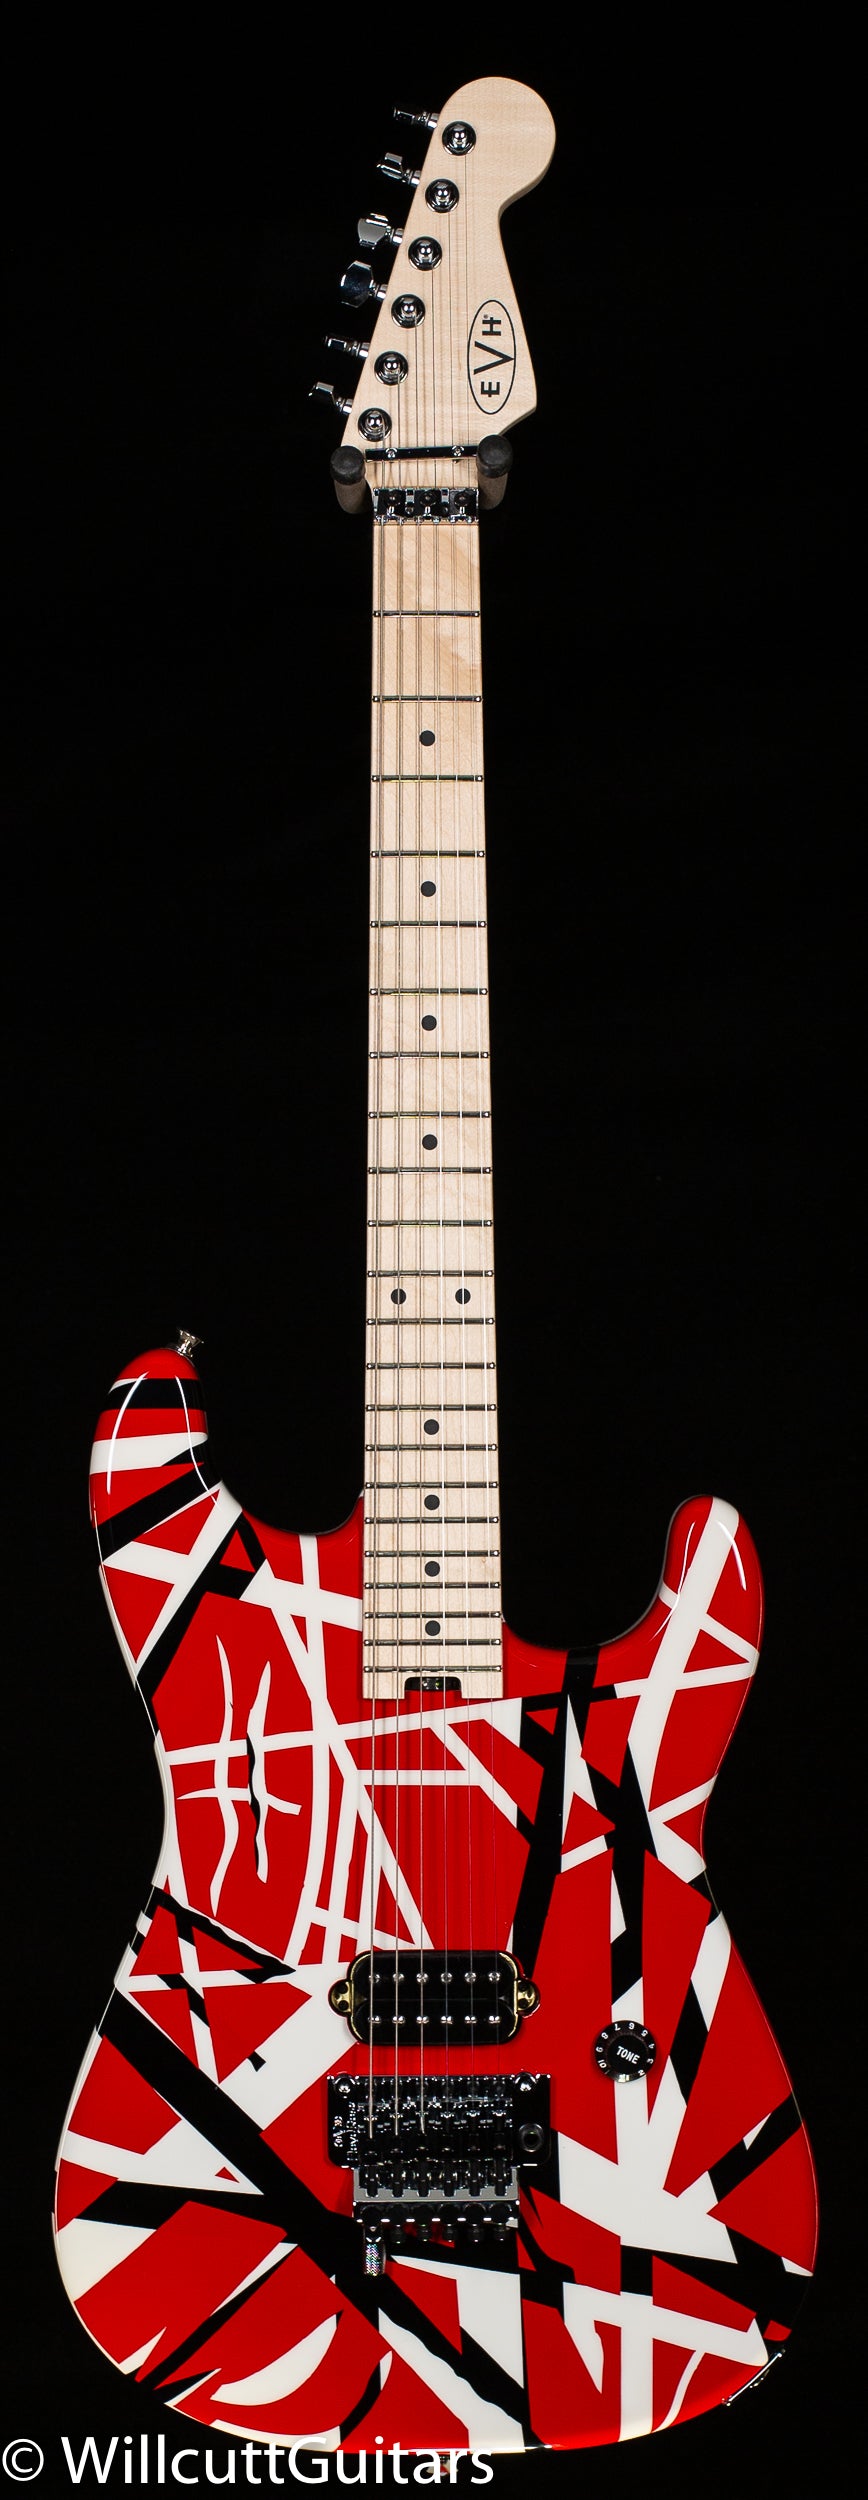 EVH Striped Series Red with Black Stripes - Willcutt Guitars